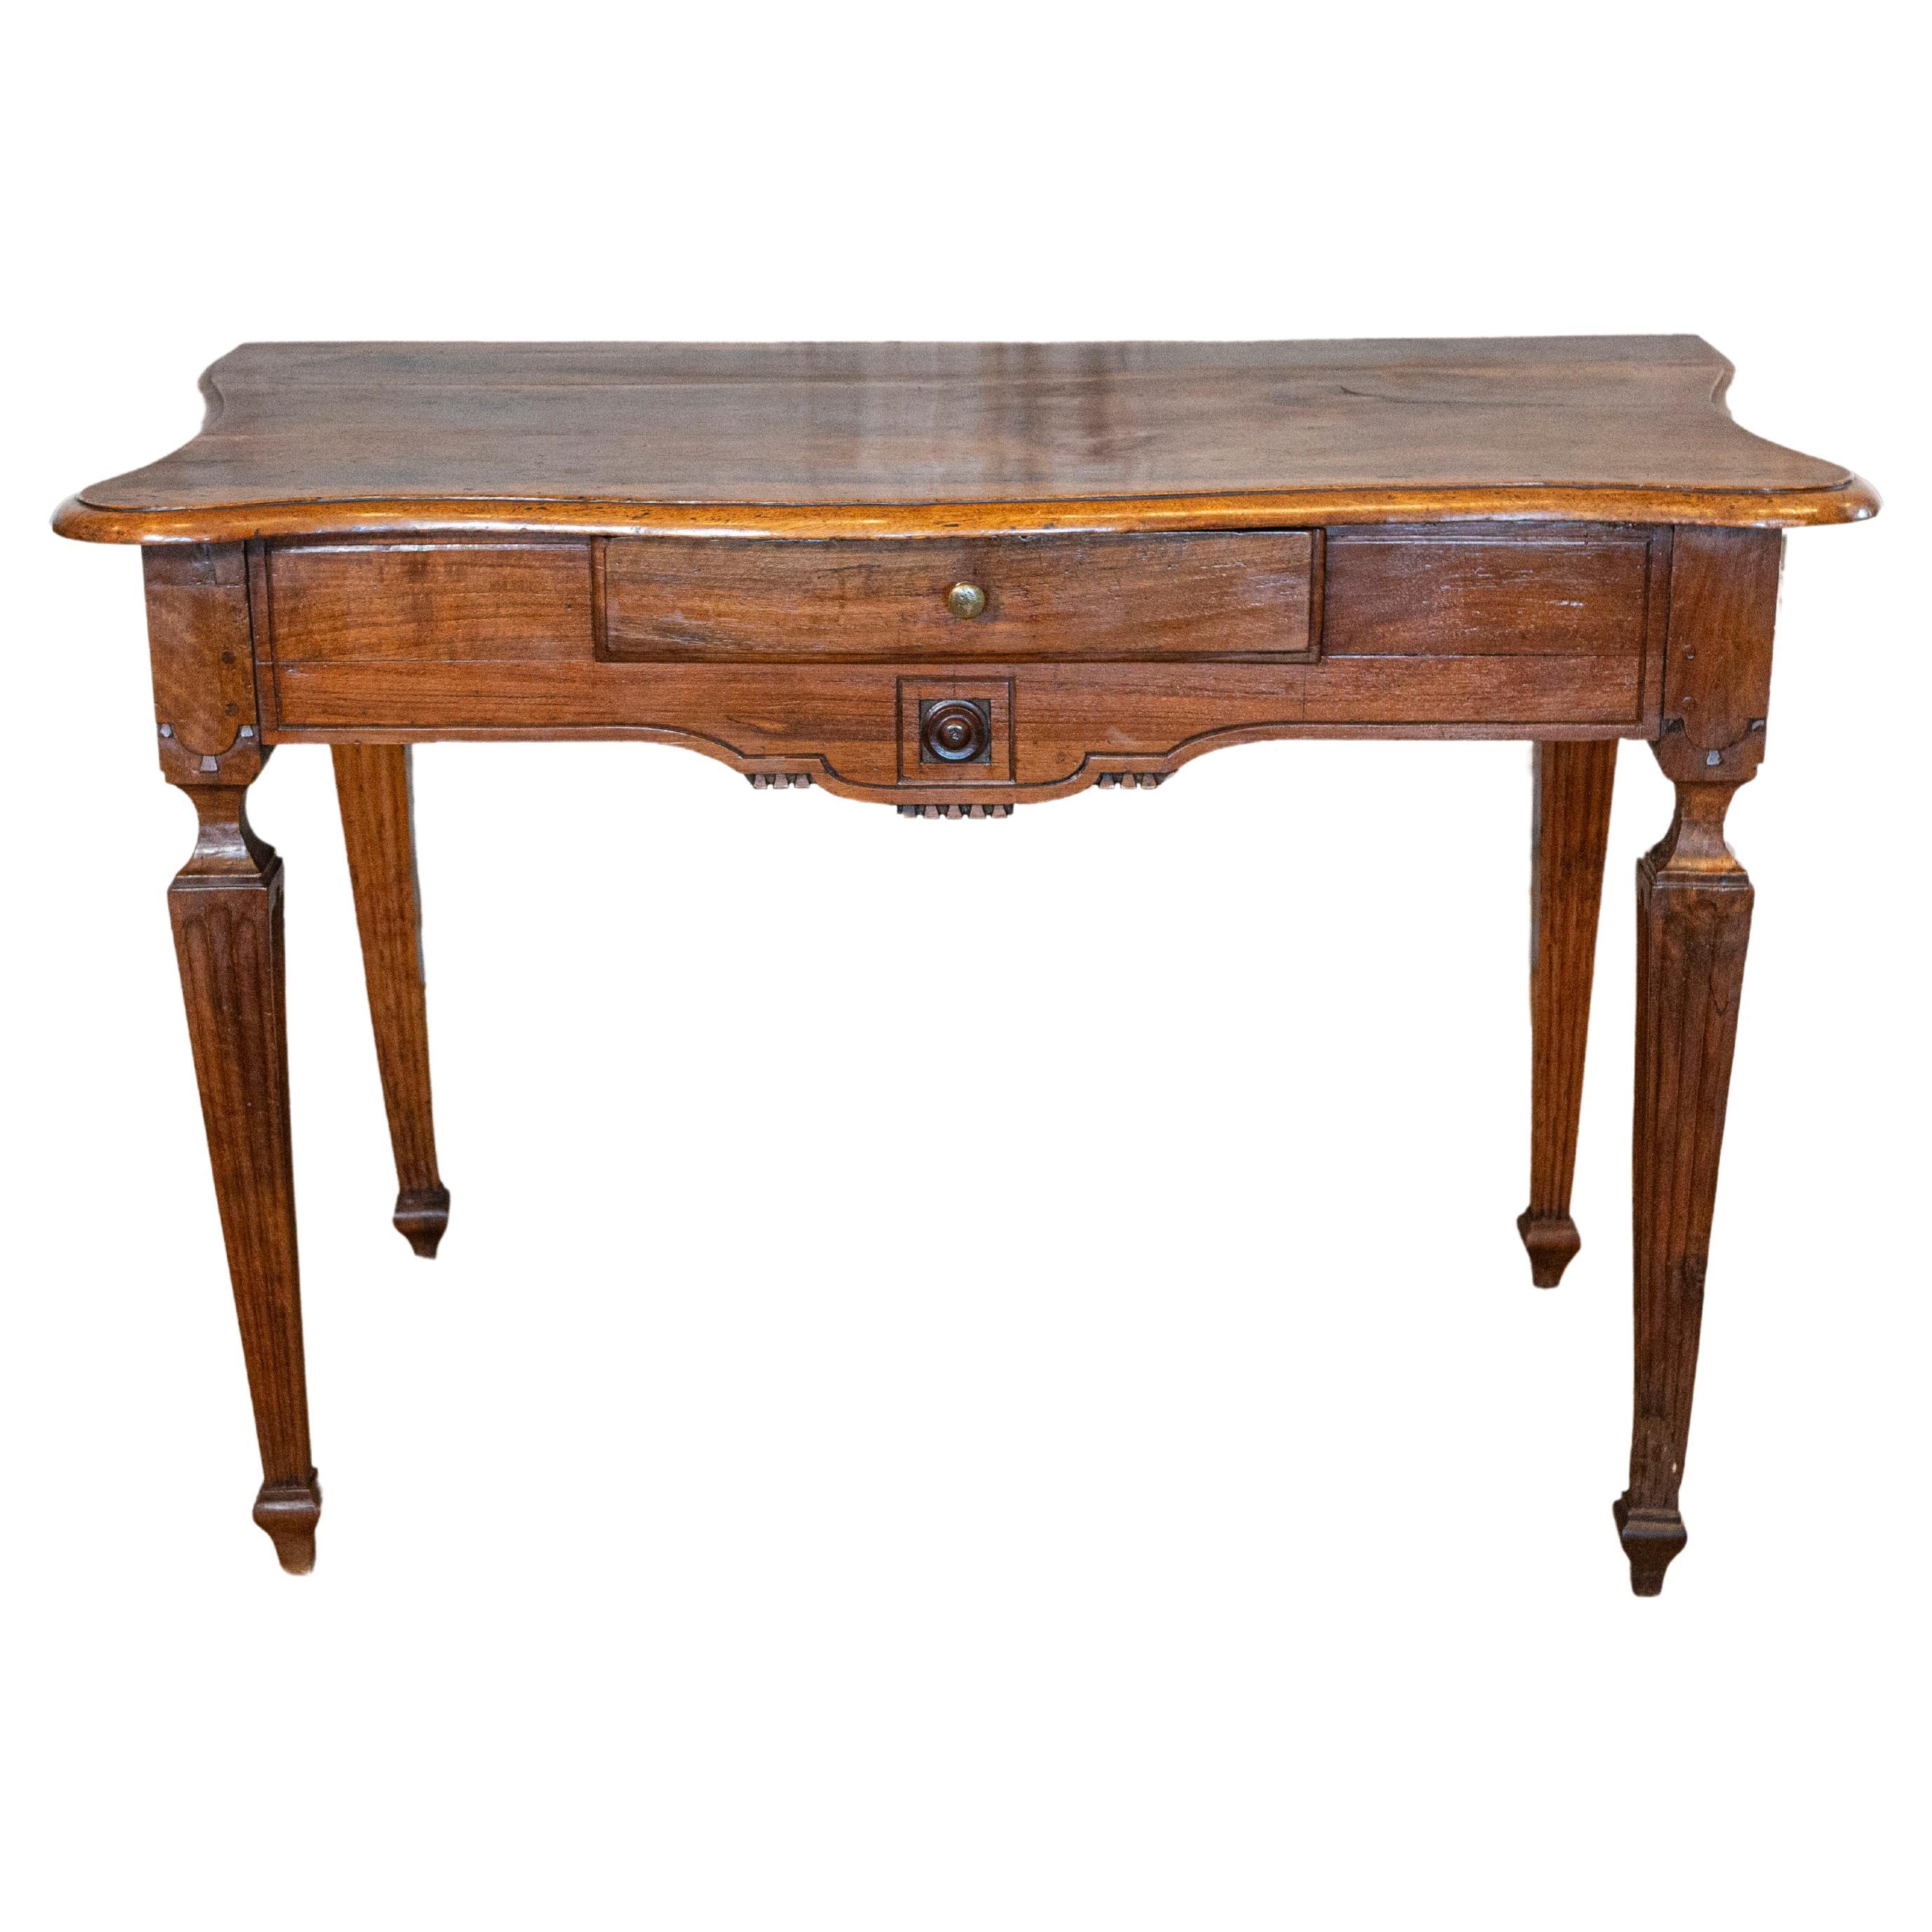 18th Century Italian Walnut Console Table with Serpentine Top and Carved Apron For Sale